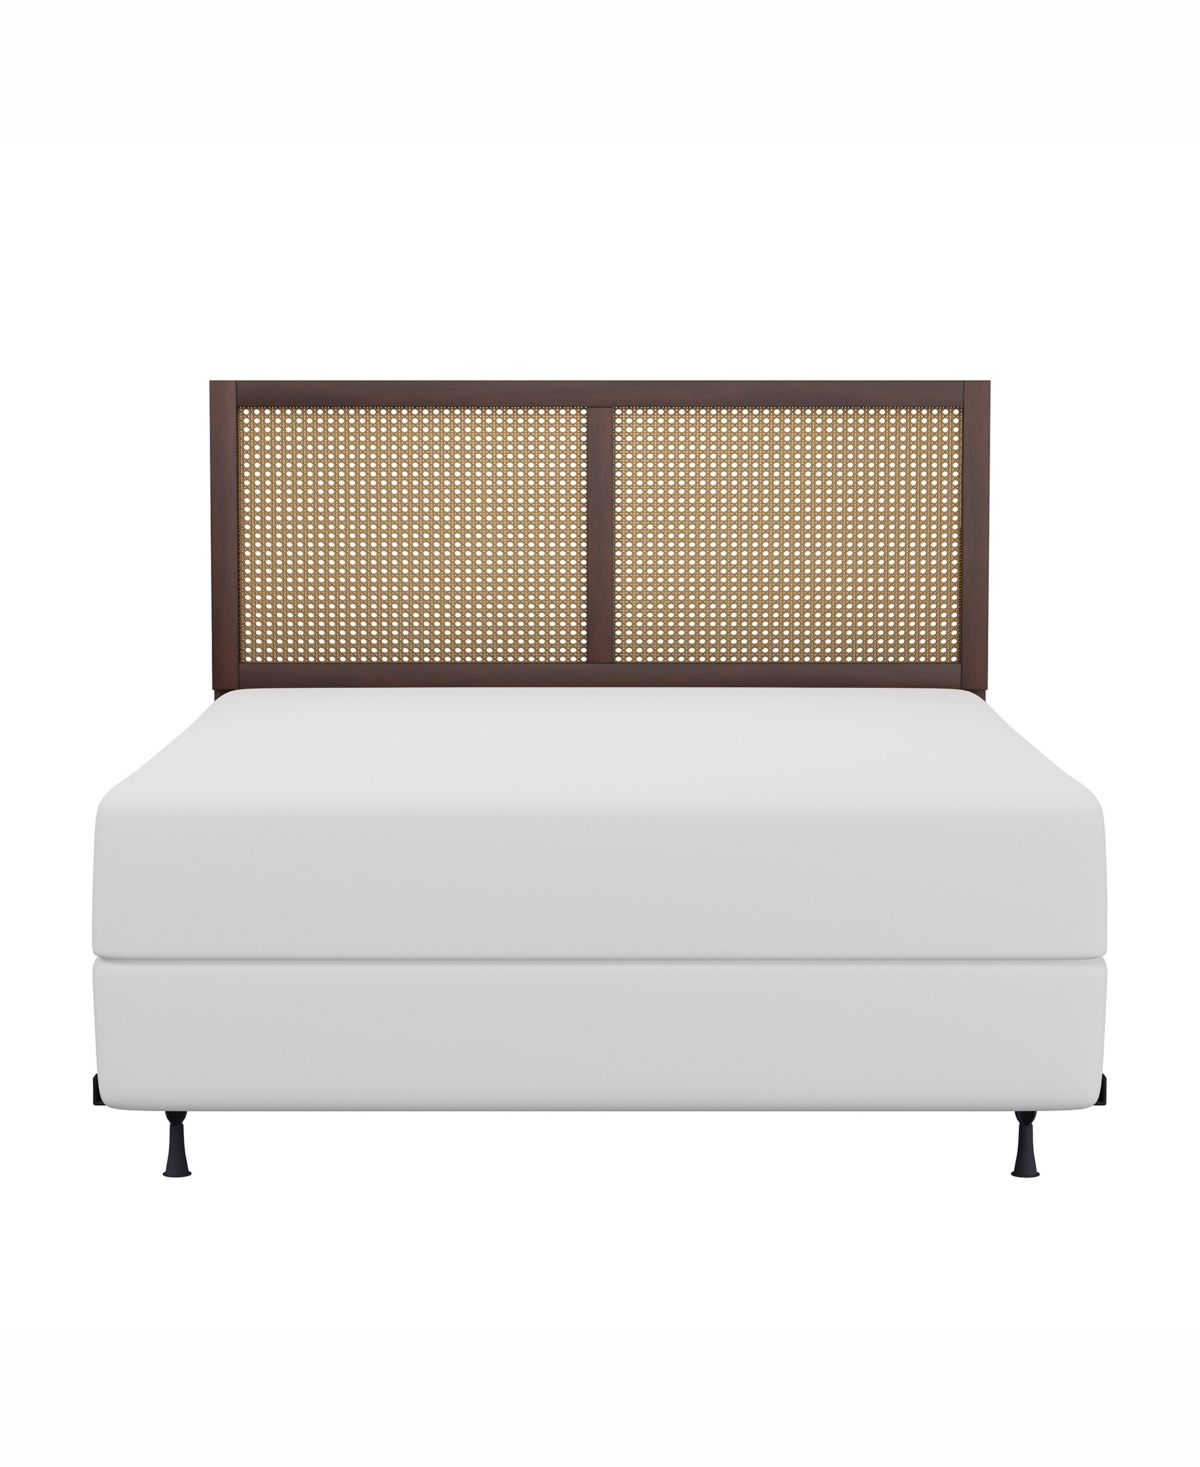 Hillsdale 50" Wood And Cane Panel Serena Furniture Full/queen Headboard With Frame In Chocolate